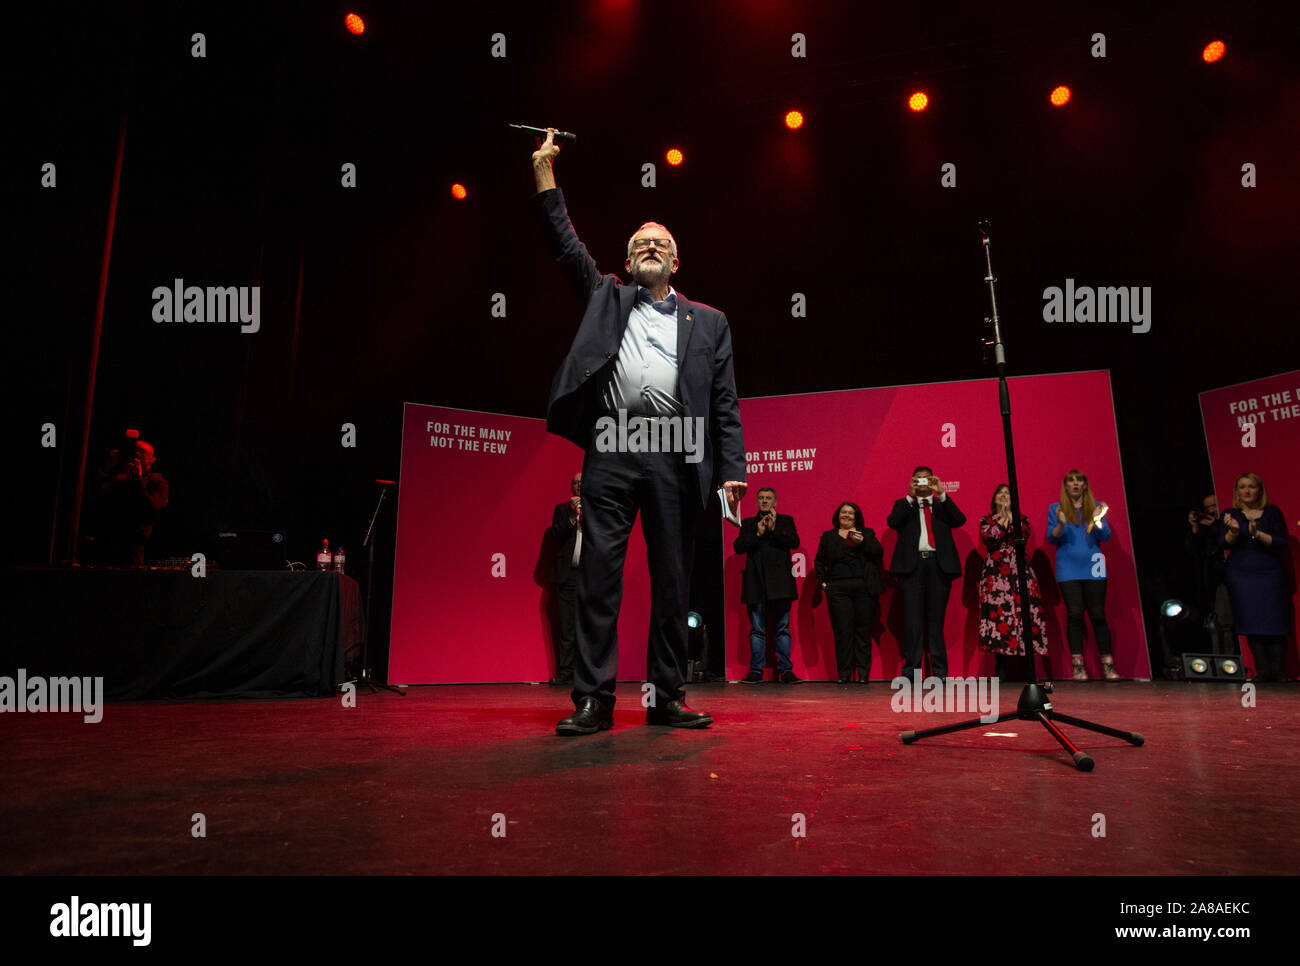 Manchester, UK. 7th November 2019. Jeremy Corbyn, Leader of the Labour Party and MP for Islington North, waves after speaking at the Labour General Election Rally held at the O2 Apollo in Ardwick, Manchester. © Russell Hart/Alamy Live News. Stock Photo